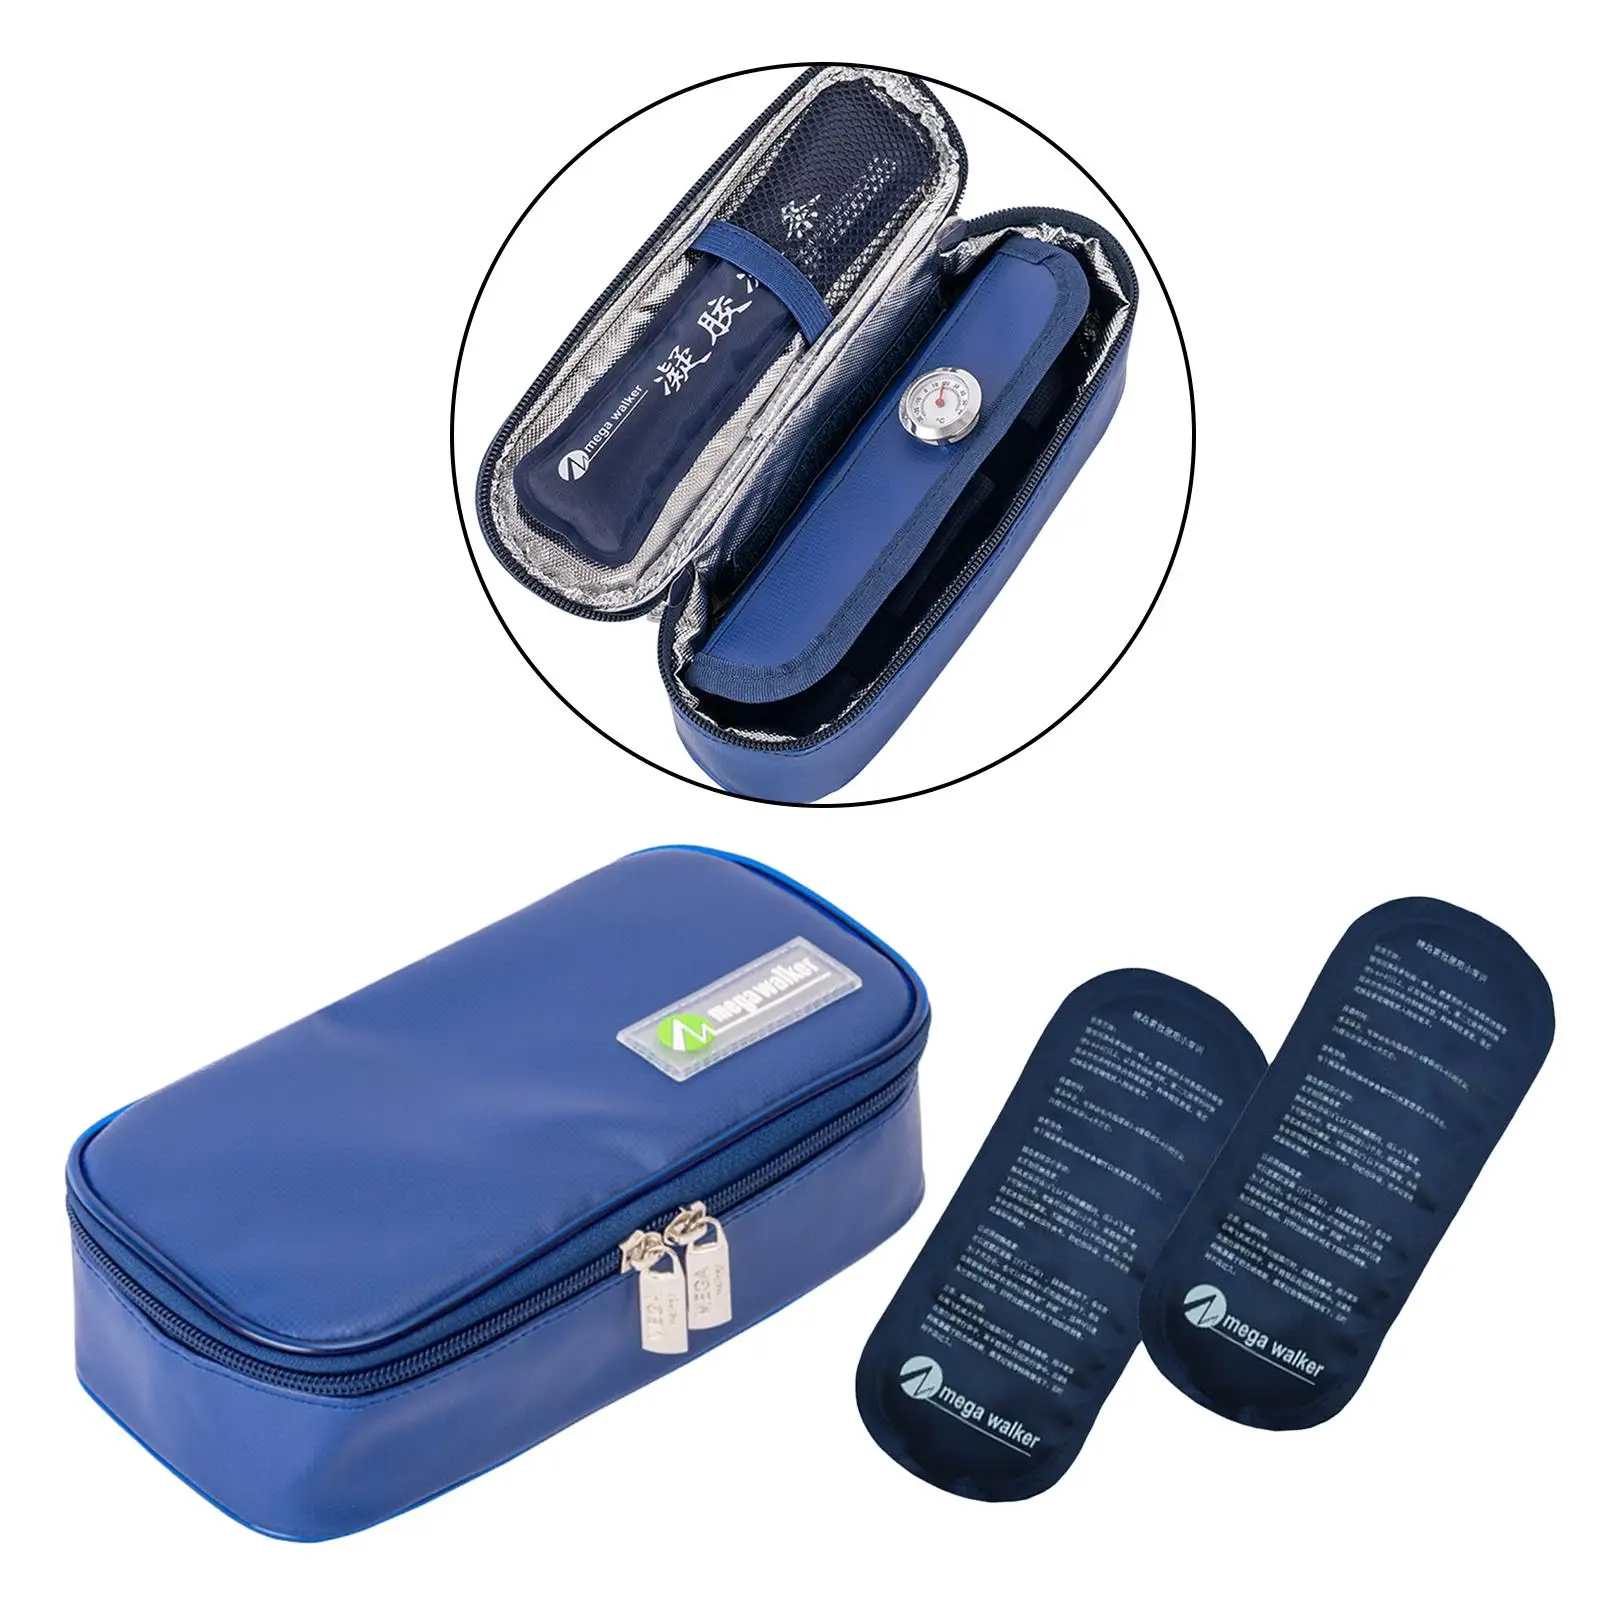 Portable  Insulin Bag   Refrigerated Ice Box  Ice Pack Insulation Organizer Travel Case